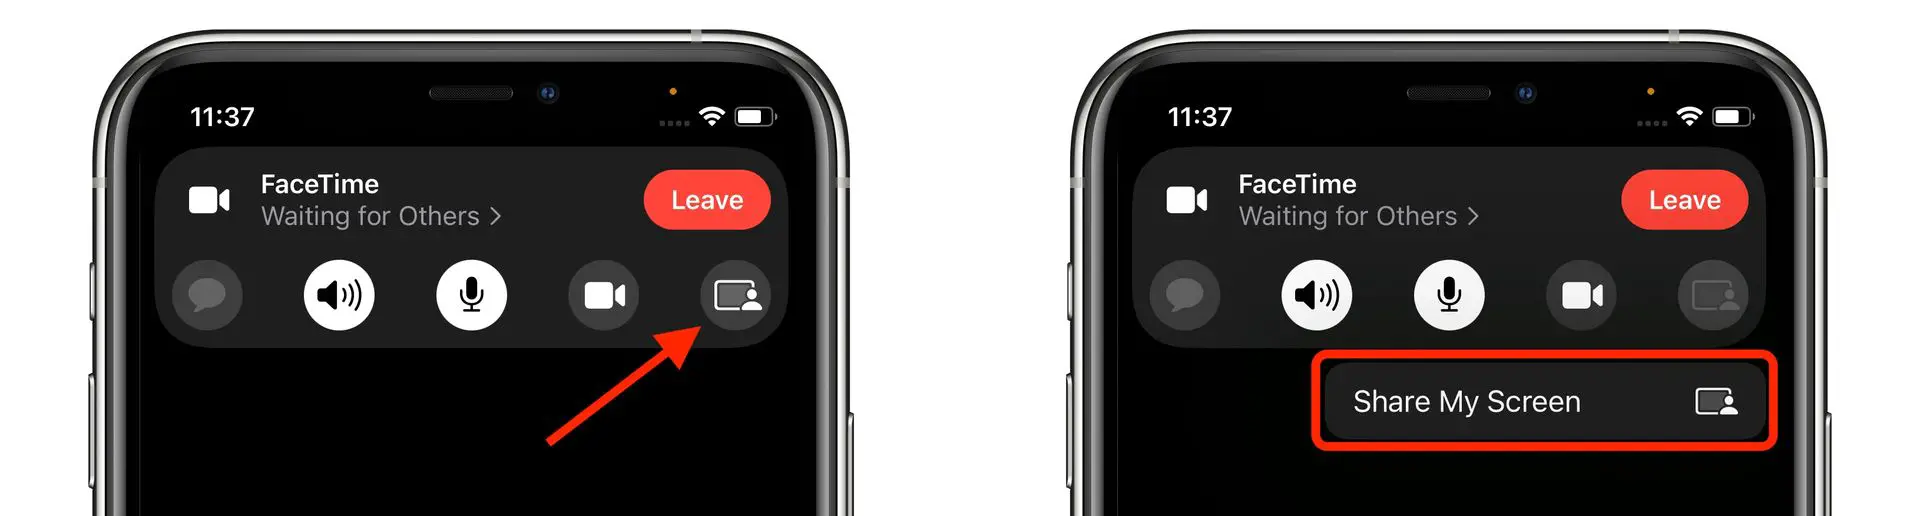 In this article, we are going to go over the answer to how do I share my screen on Facetime, so you can show whatever is on your screen on Facetime.